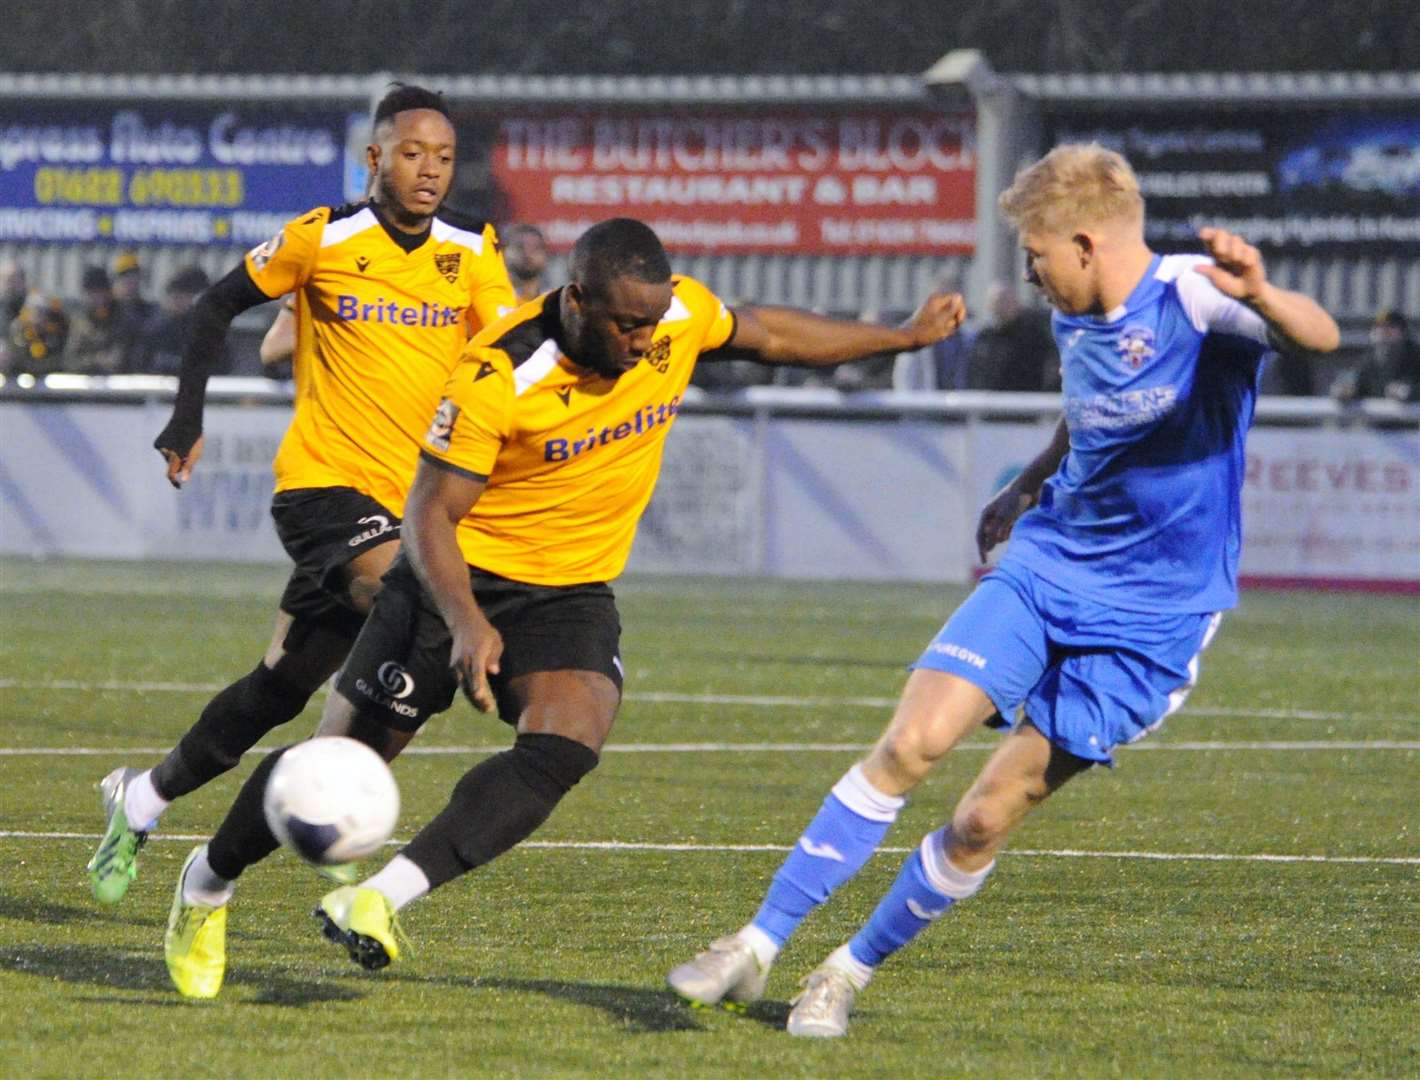 Maidstone and Tonbridge drew 2-2 at the Gallagher Stadium on New Year's Day Picture: Steve Terrell